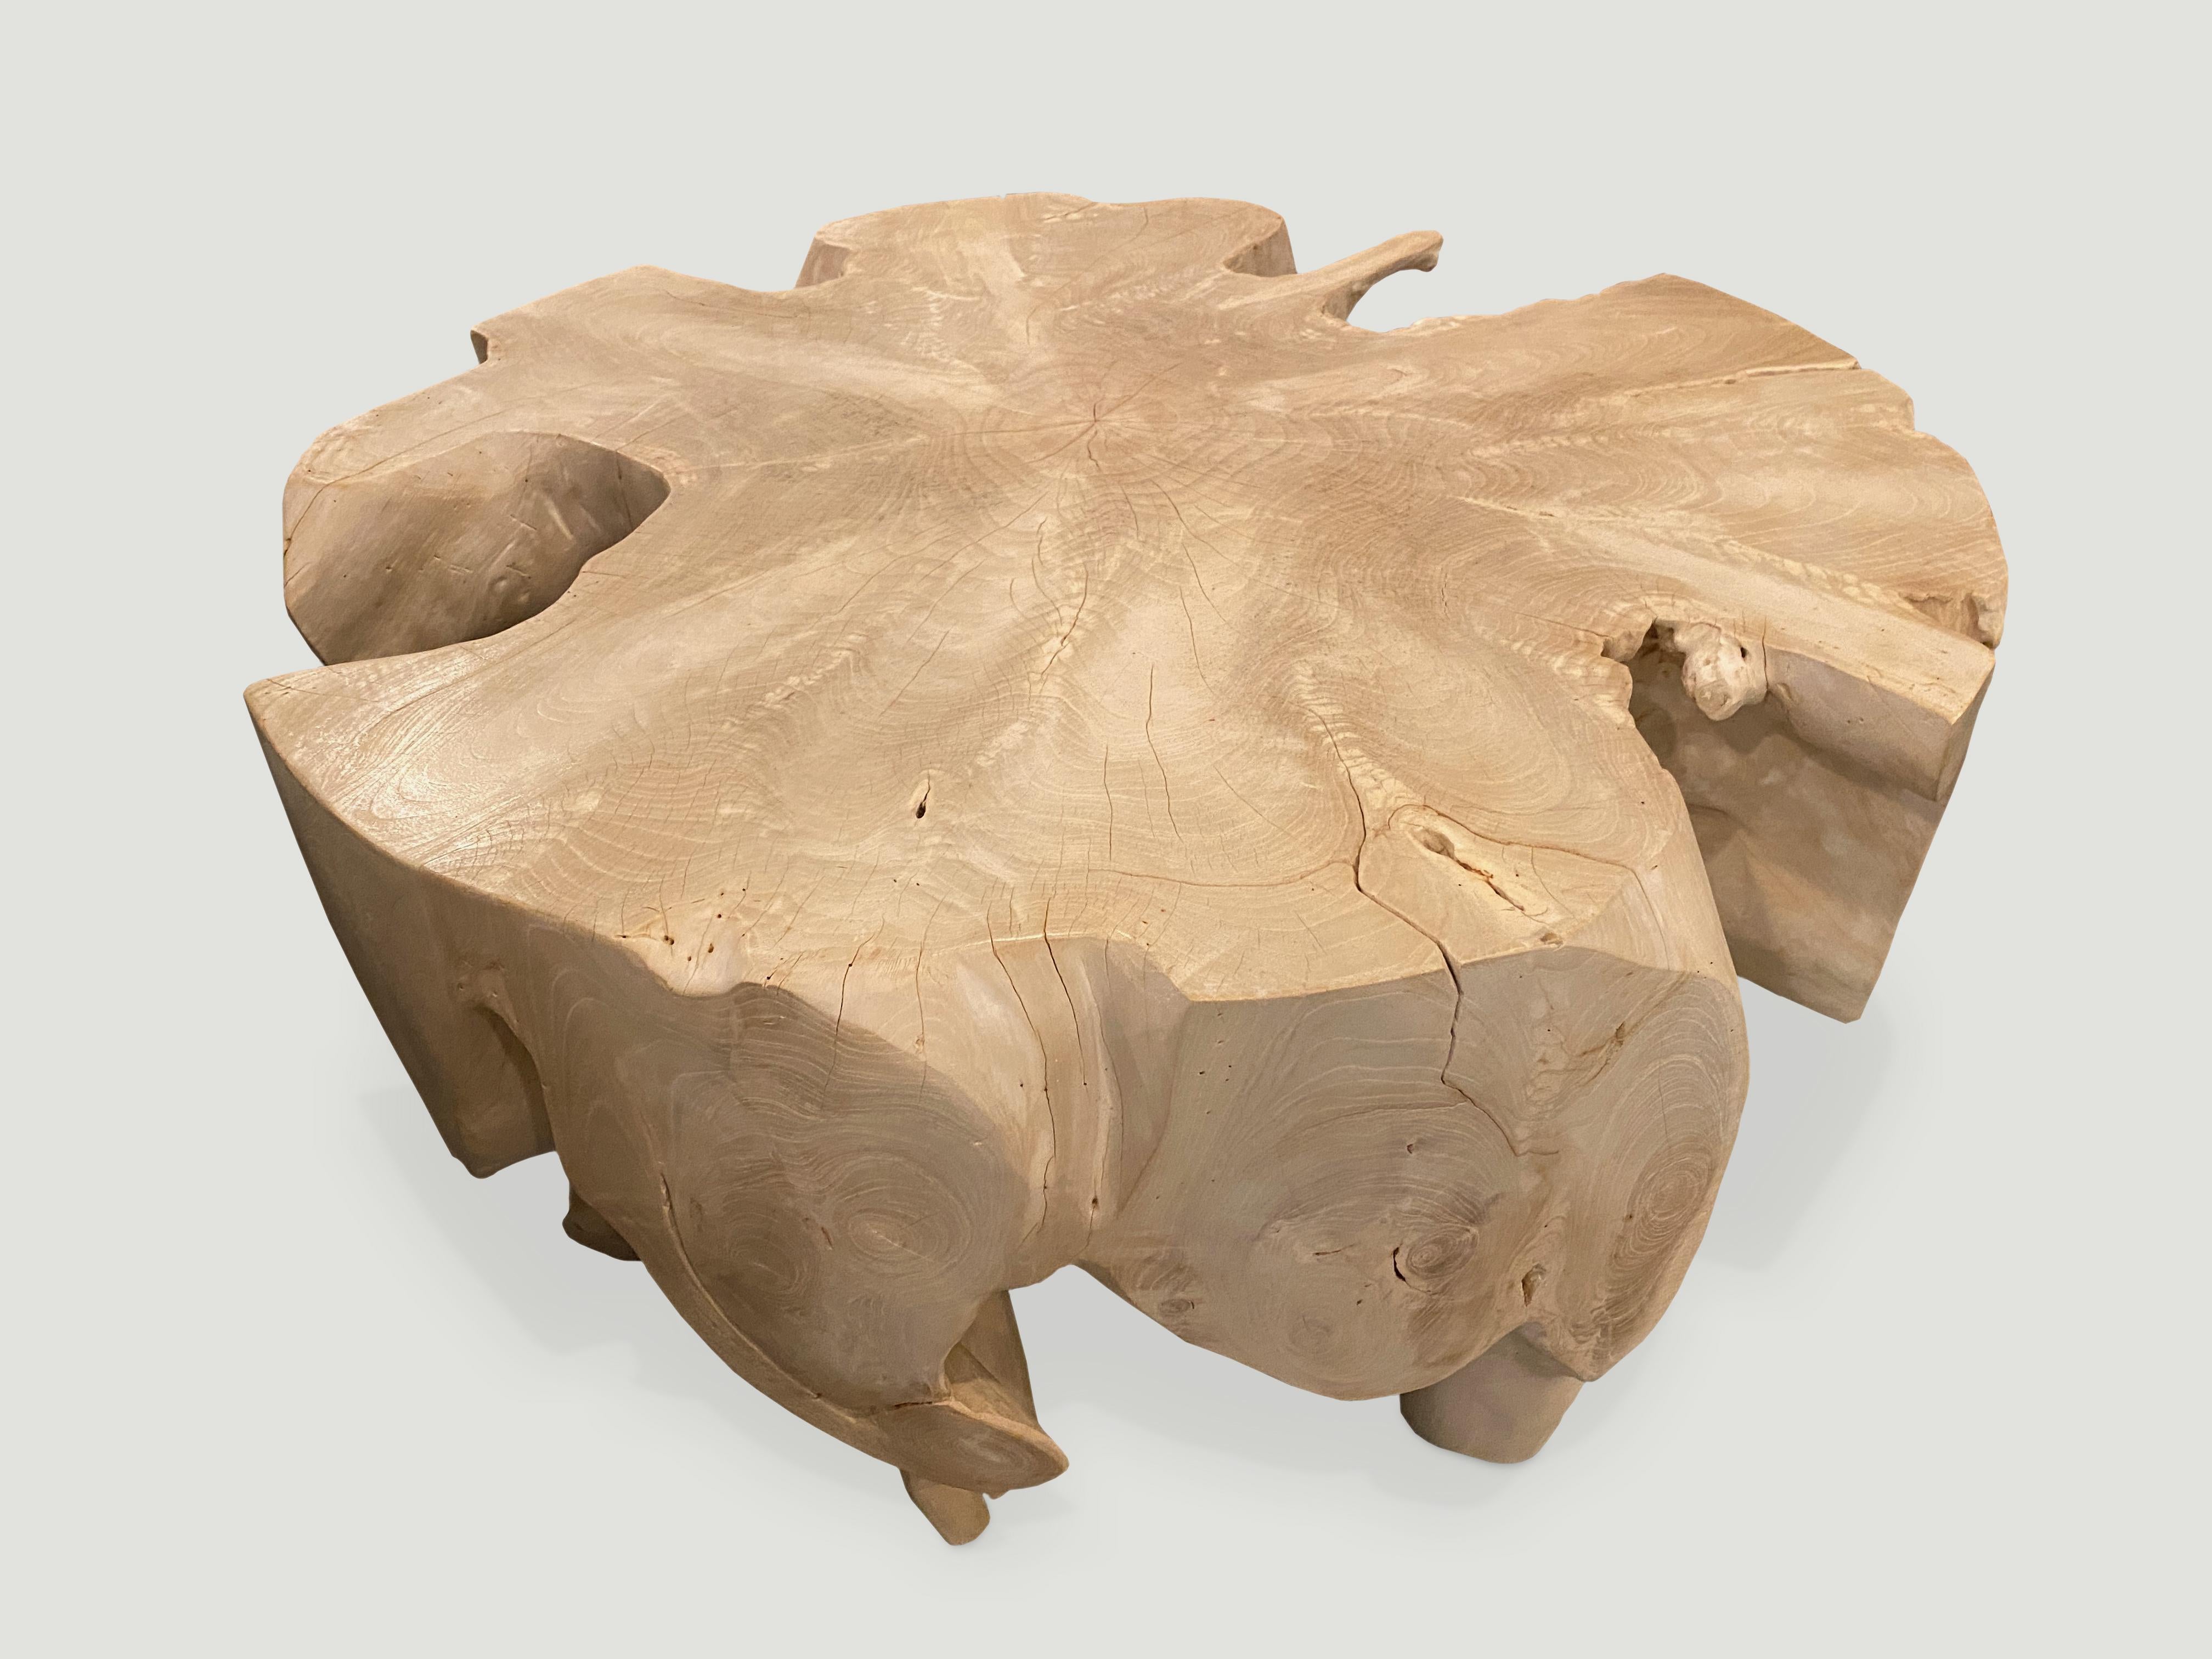 Reclaimed teak root coffee table. Hand carved into this beautiful shape whilst respecting the natural organic wood. Bleached to a stunning bone color. Perfect for inside or outside living.

The St. Barts collection features an exciting new line of